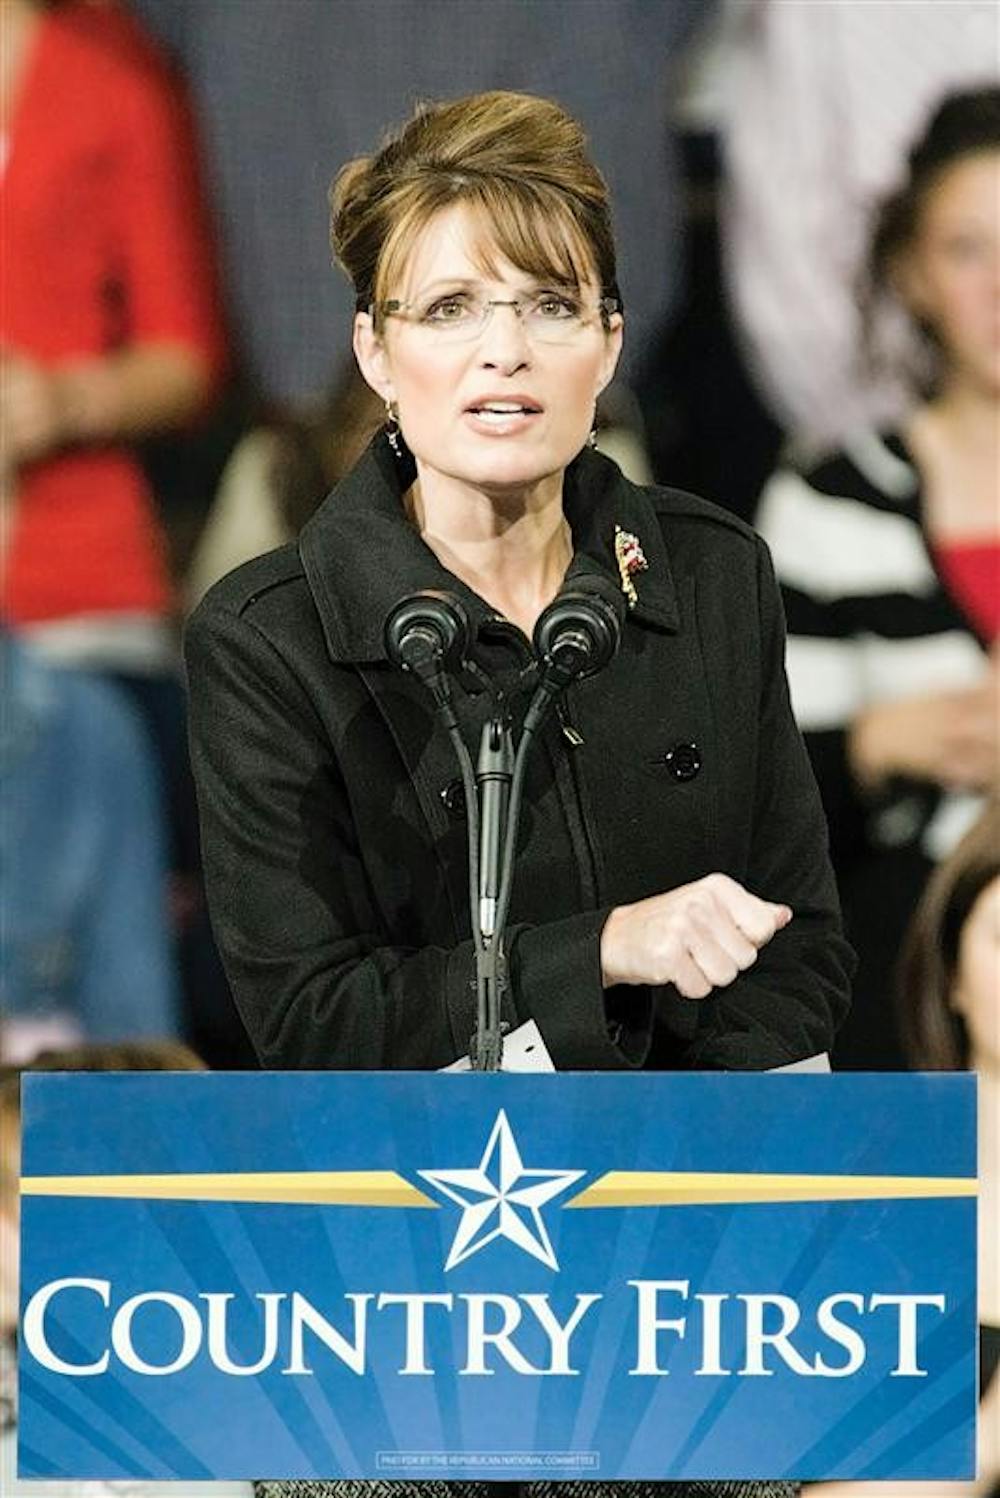 Republican vice presidential candidate and Alaska governor Sarah Palin speaks to supporters during a campaign stop Saturday evening in Fort Wayne, Ind.